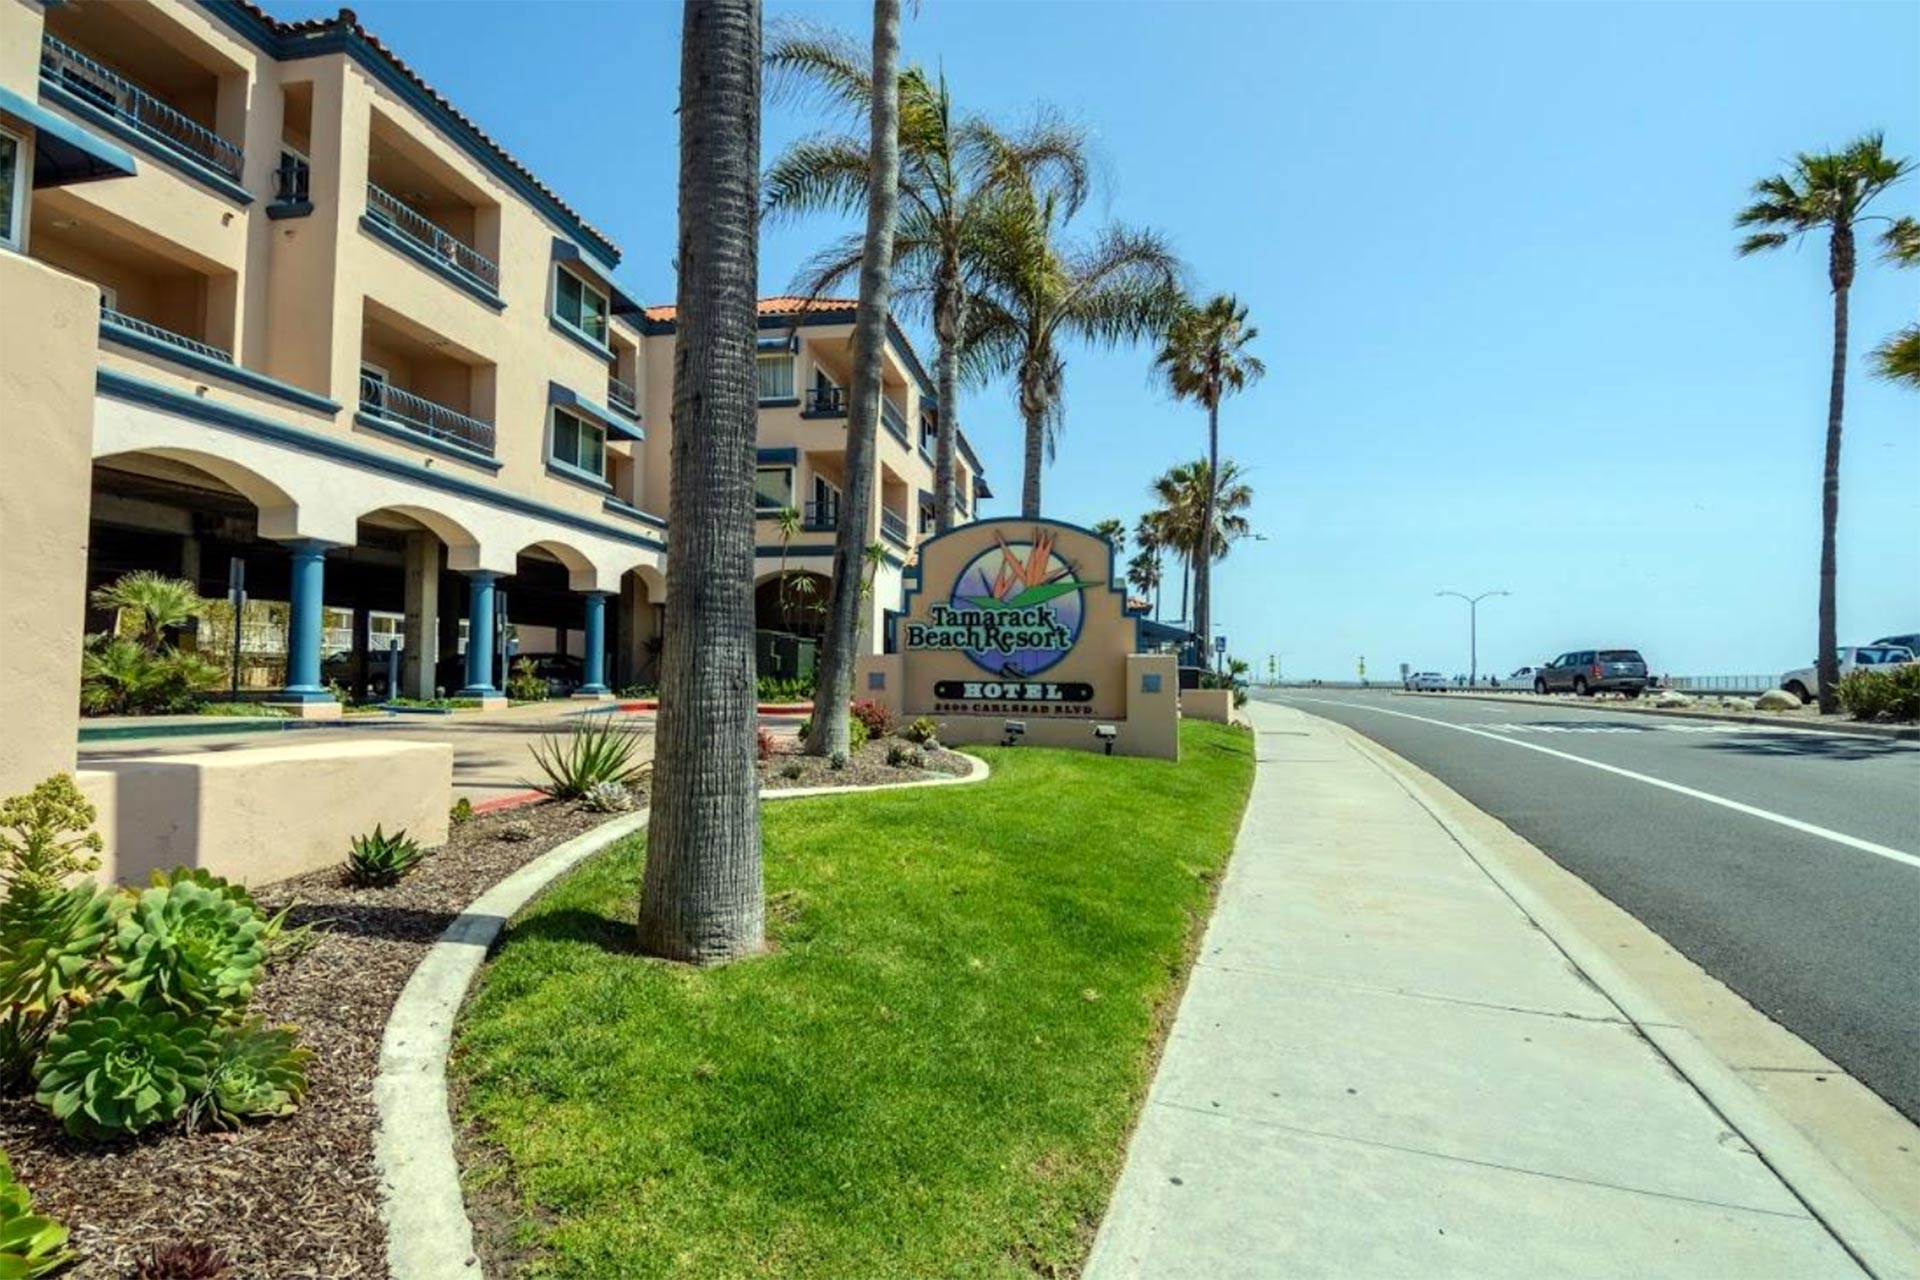 11 Best California Beach Resorts for Families  Family 